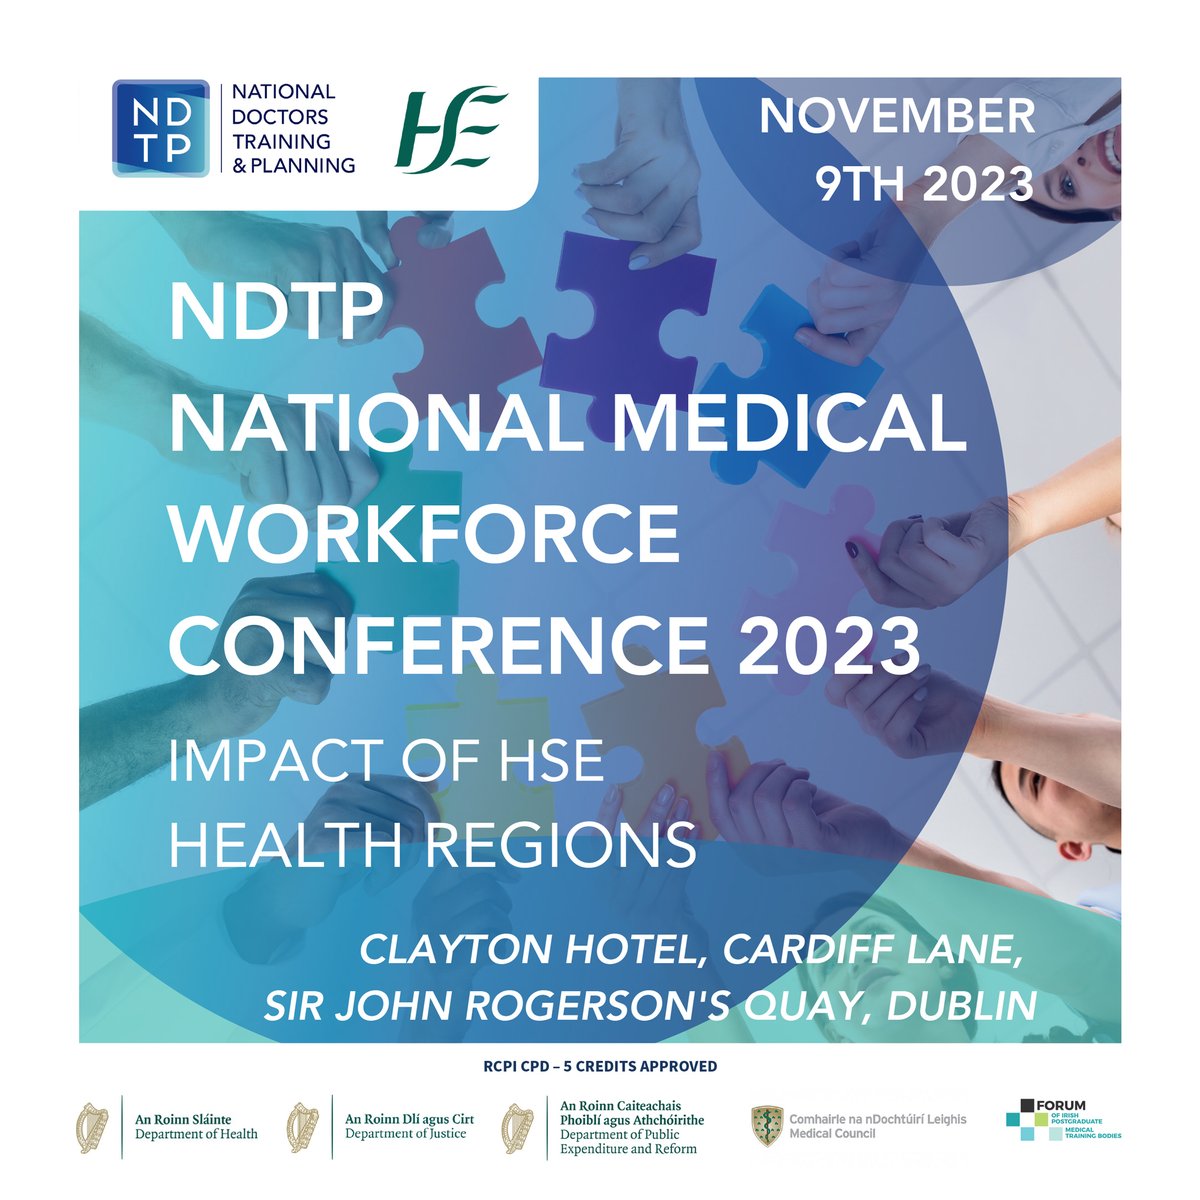 At @InvestnetEvents we’re delighted to be managing this sold out Conference for the @NDTP_HSE !
It's just 2 days away now from this exciting day of listening and learning on the 'Impact of HSE Health Regions'.
@HSELive 

#NDTPConf23